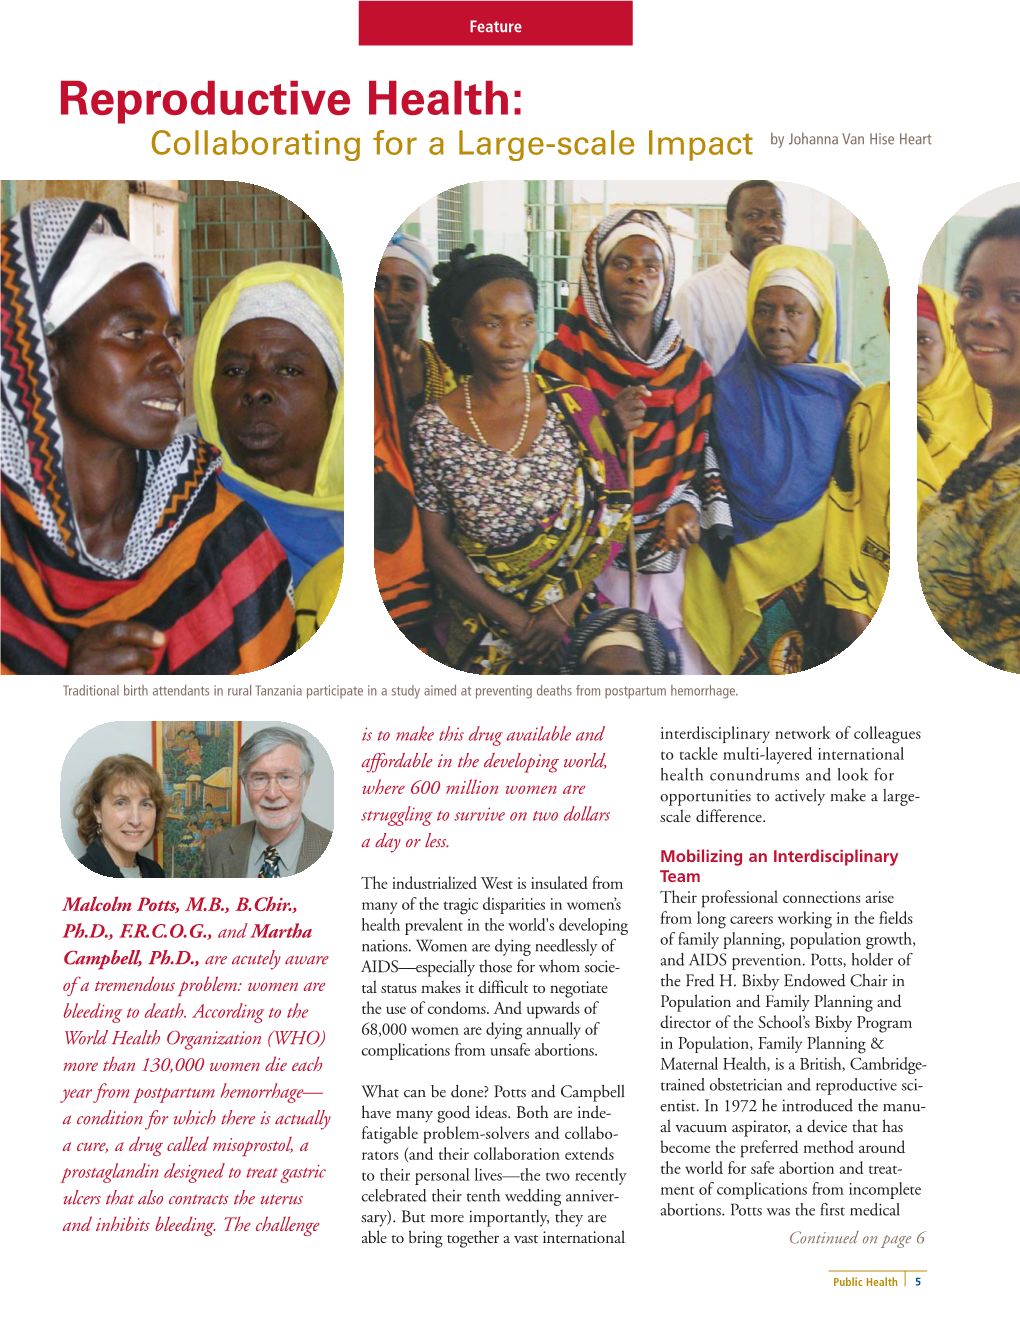 Reproductive Health: Collaborating for a Large-Scale Impact by Johanna Van Hise Heart